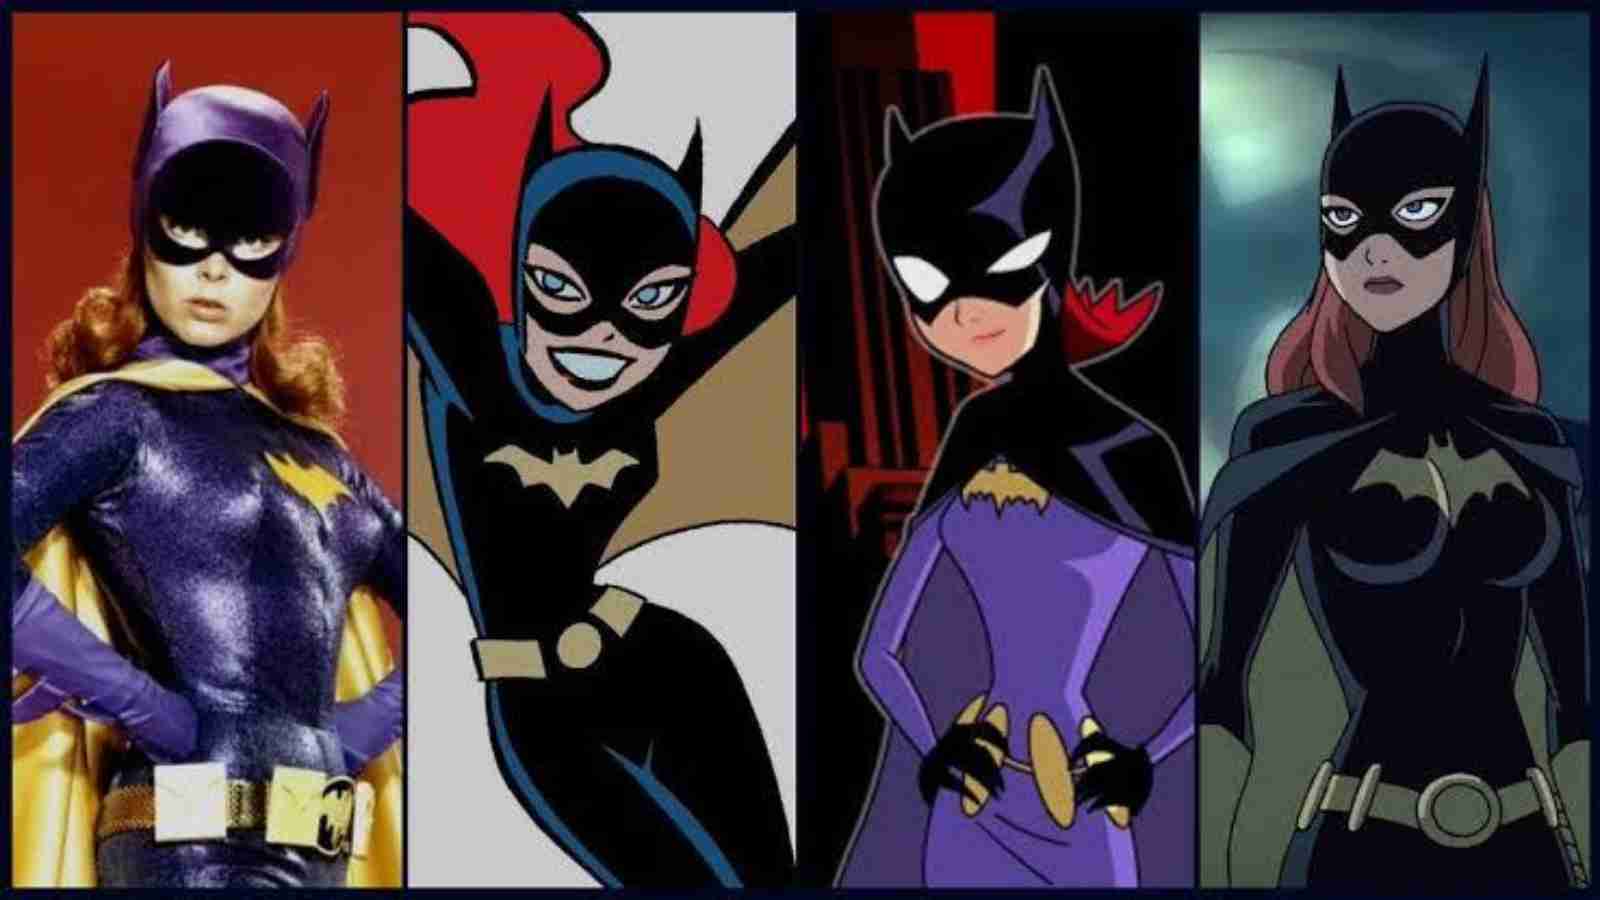 Batgirl's character will soon appear in live-action for the first time